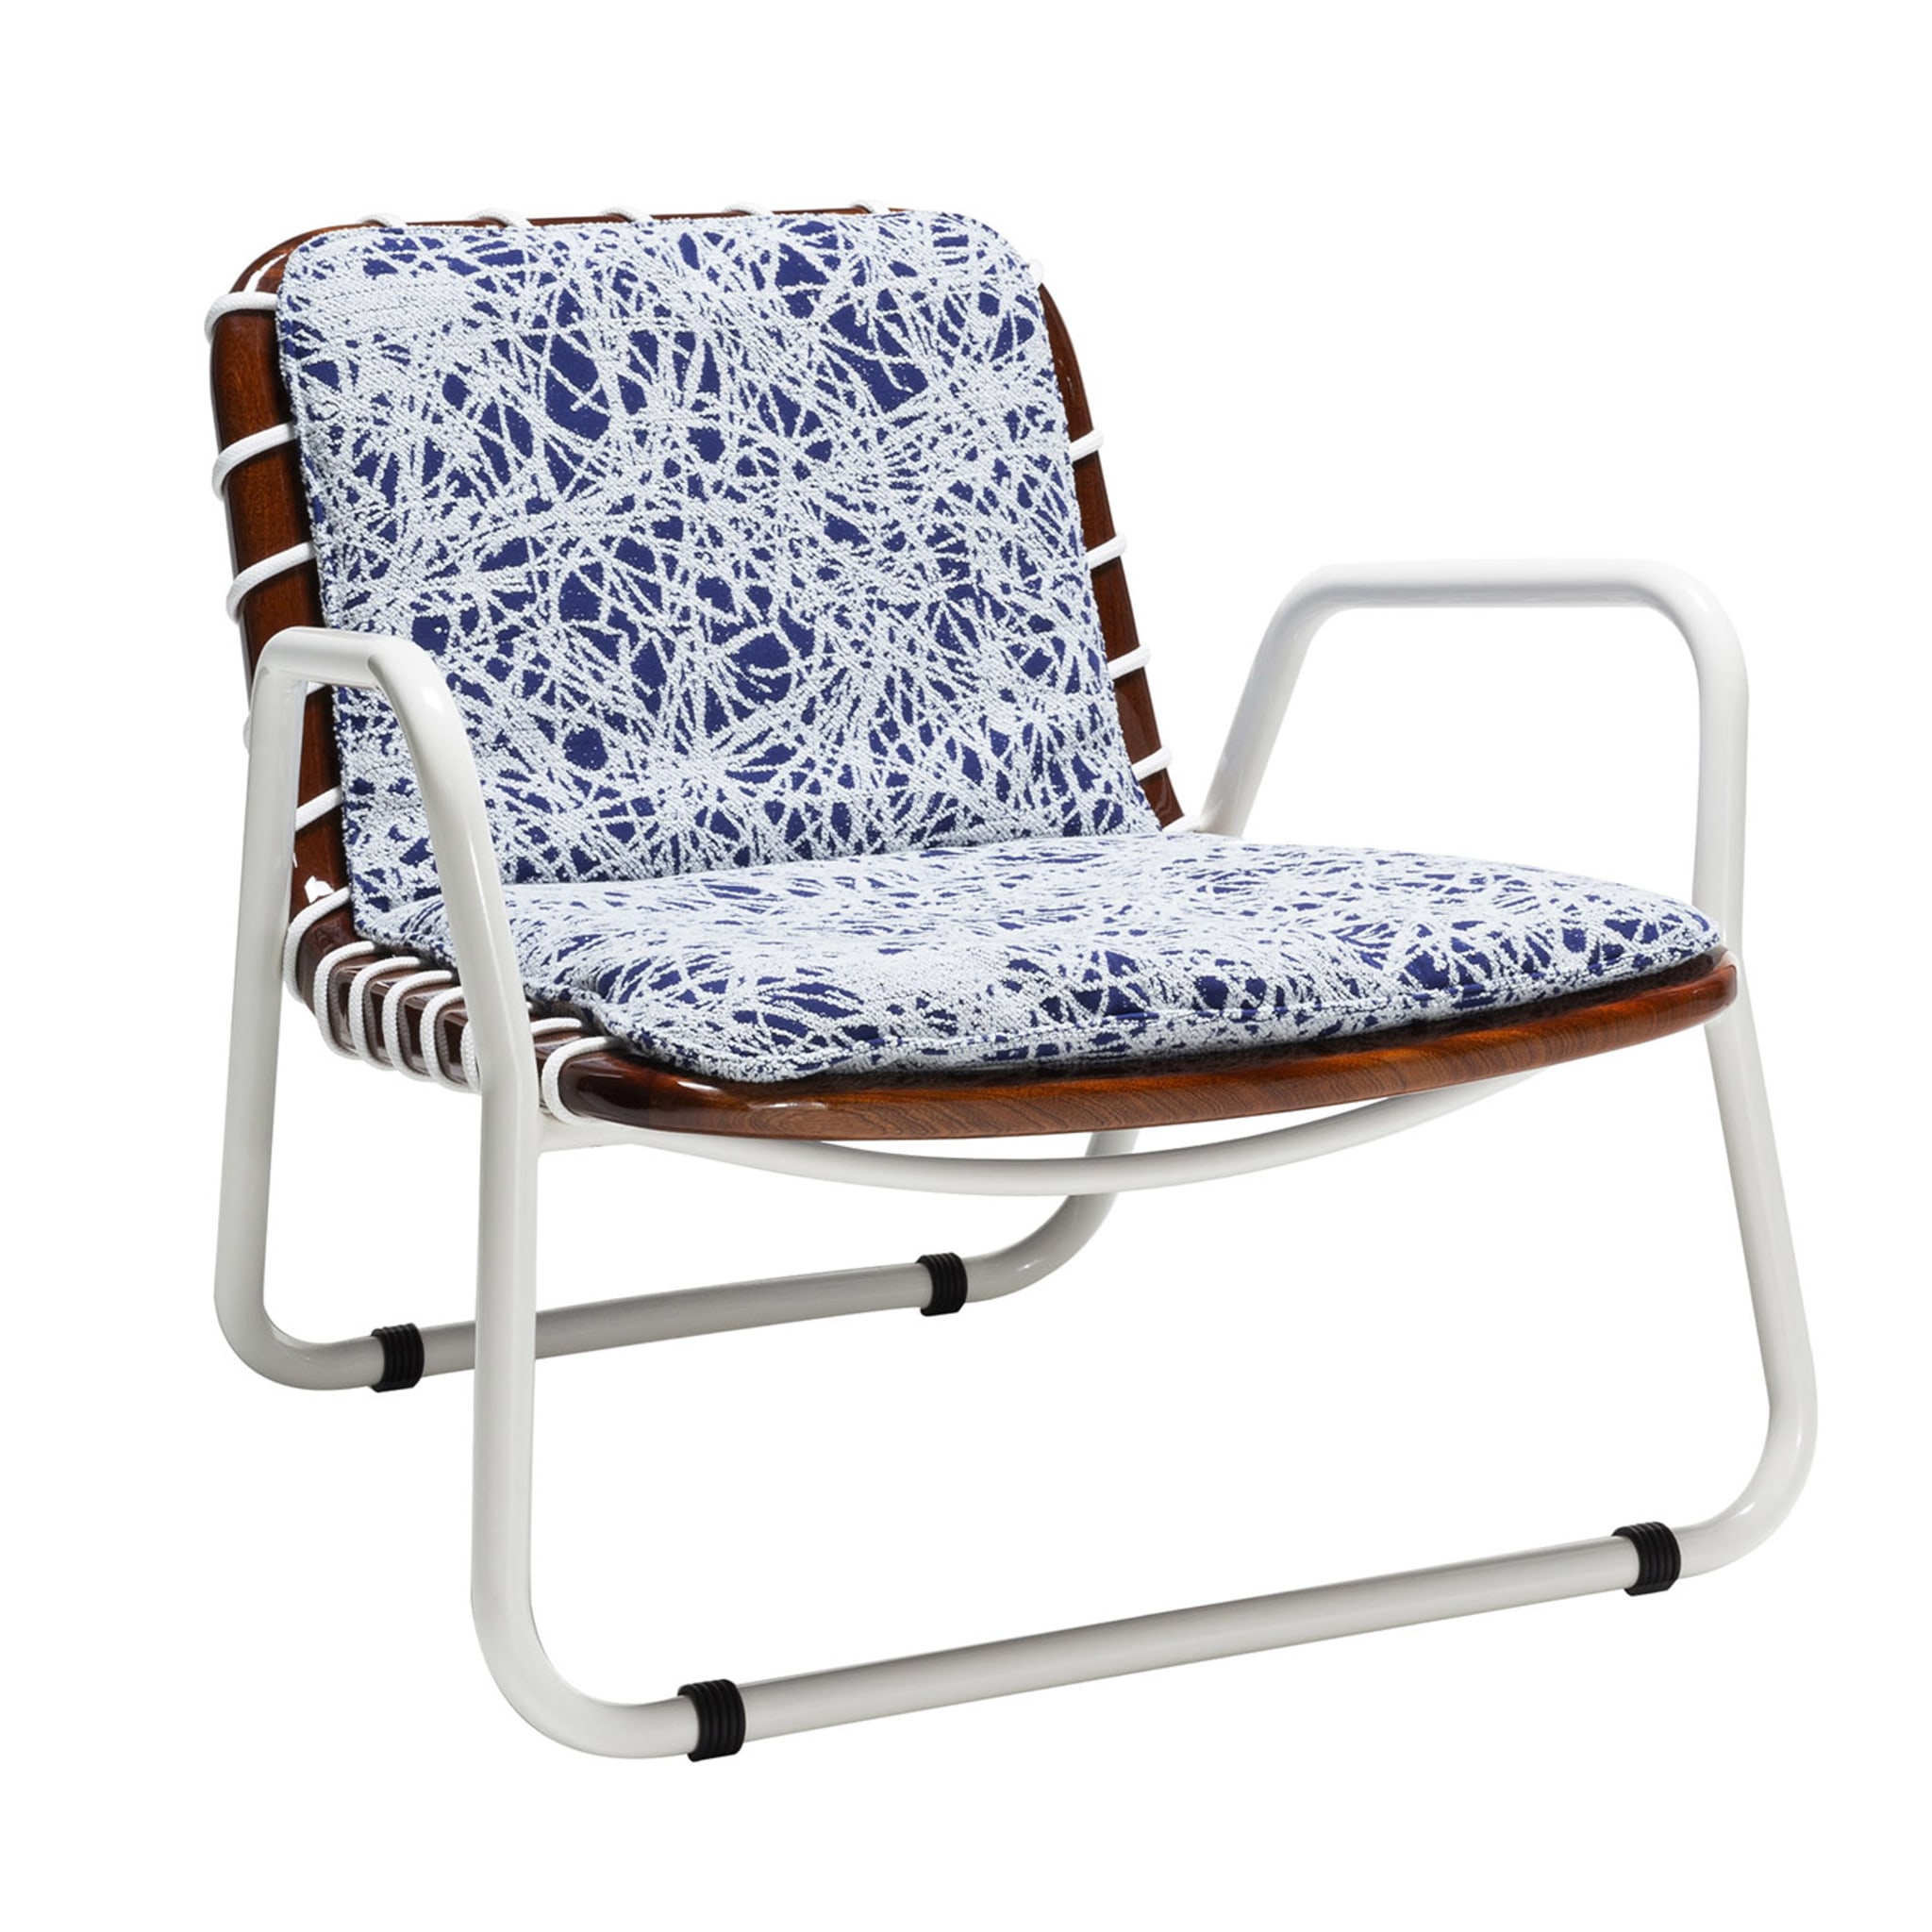 Sunset Blue & White Armchair by Paola Navone - Main view